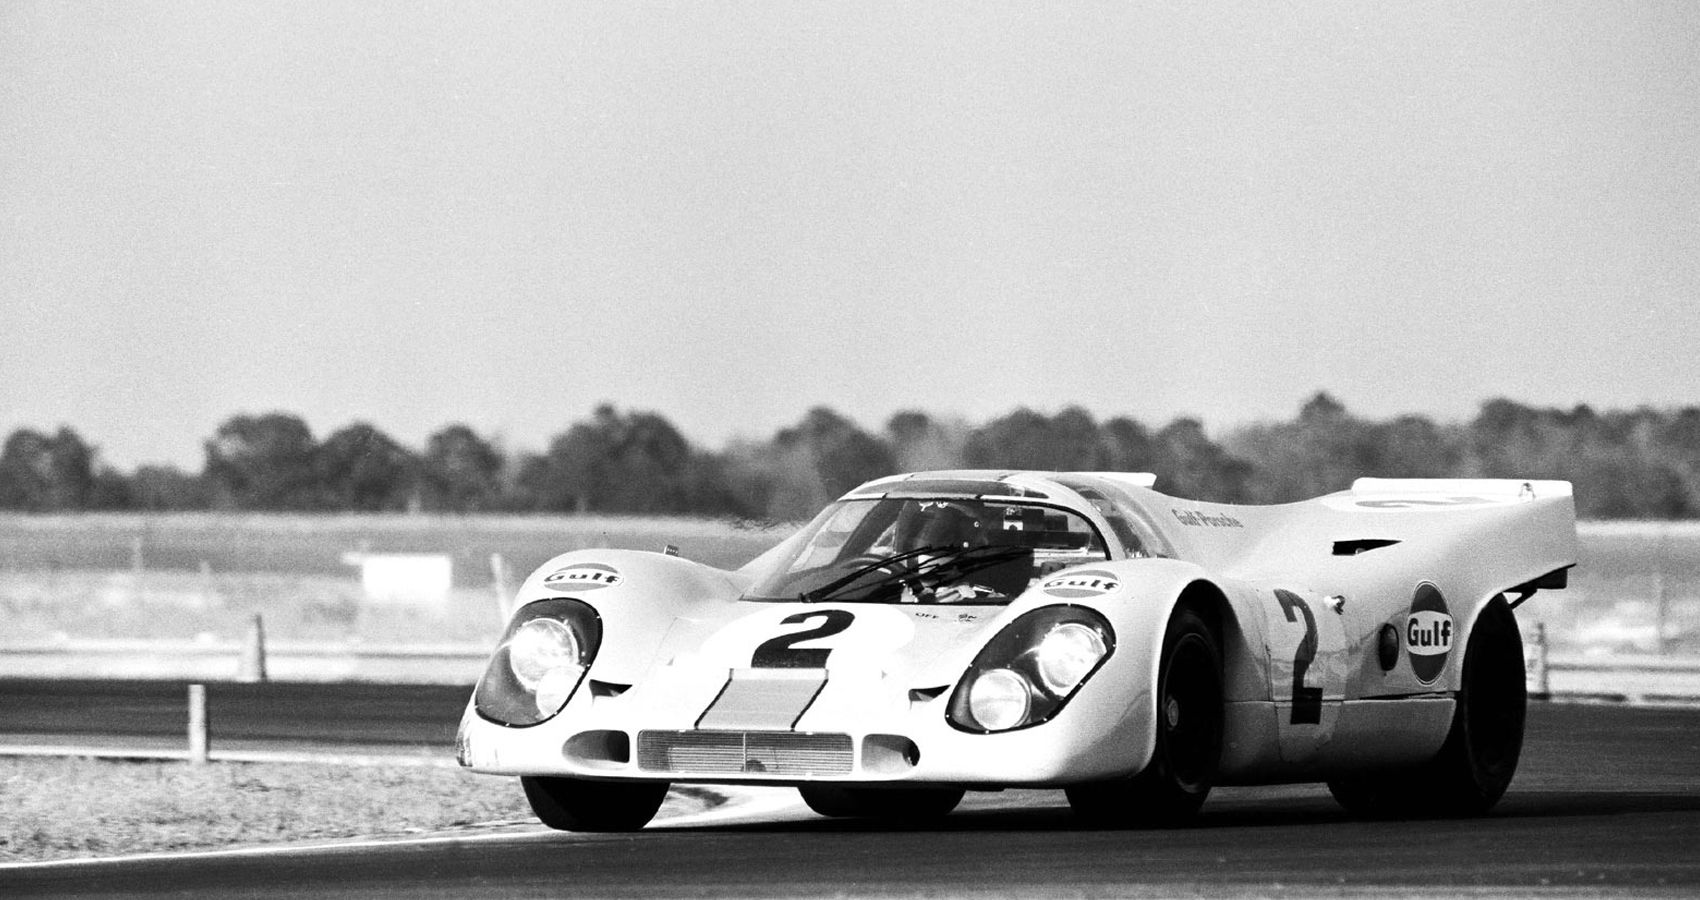 The front of a Gulf-liveried 917 on track, black and white picture